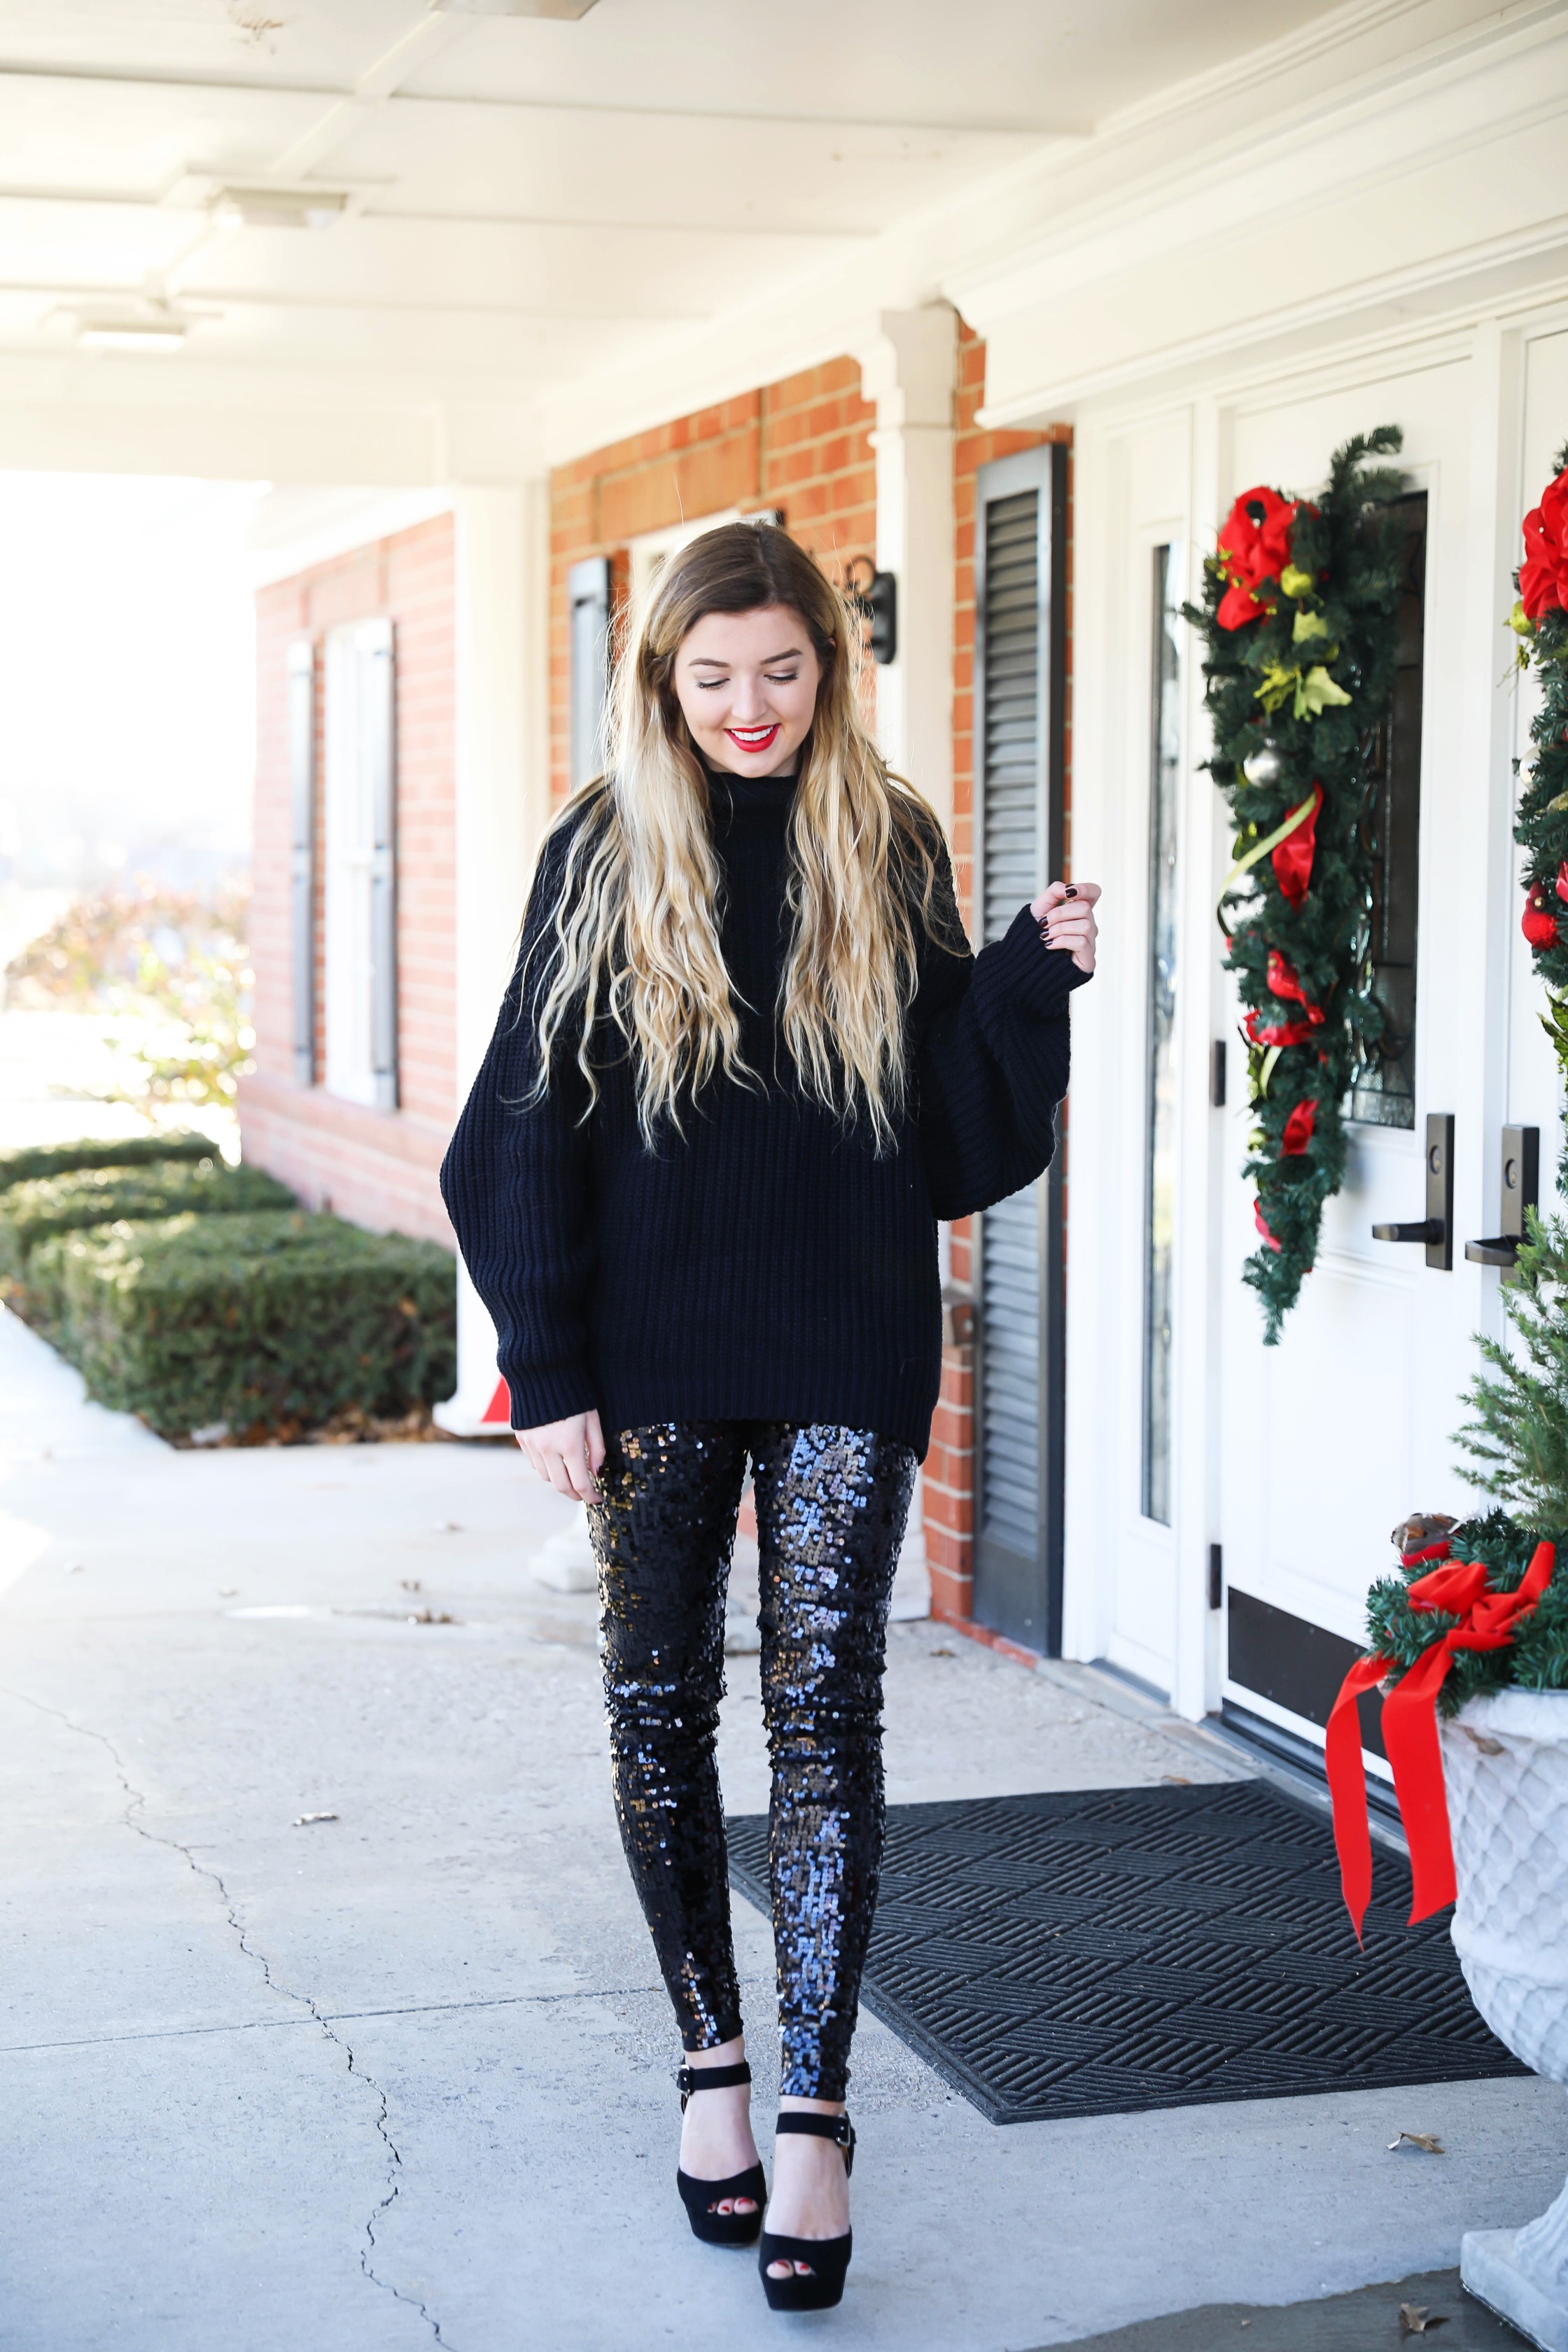 https://dailydoseofcharm.com/wp-content/uploads/2017/12/New-Years-eve-outfit-idea-sequin-pants-how-to-style-sequin-pants-for-nye-fashio-blog-daily-dose-of-charm-lauren-lindmark-4P6A7087.jpg